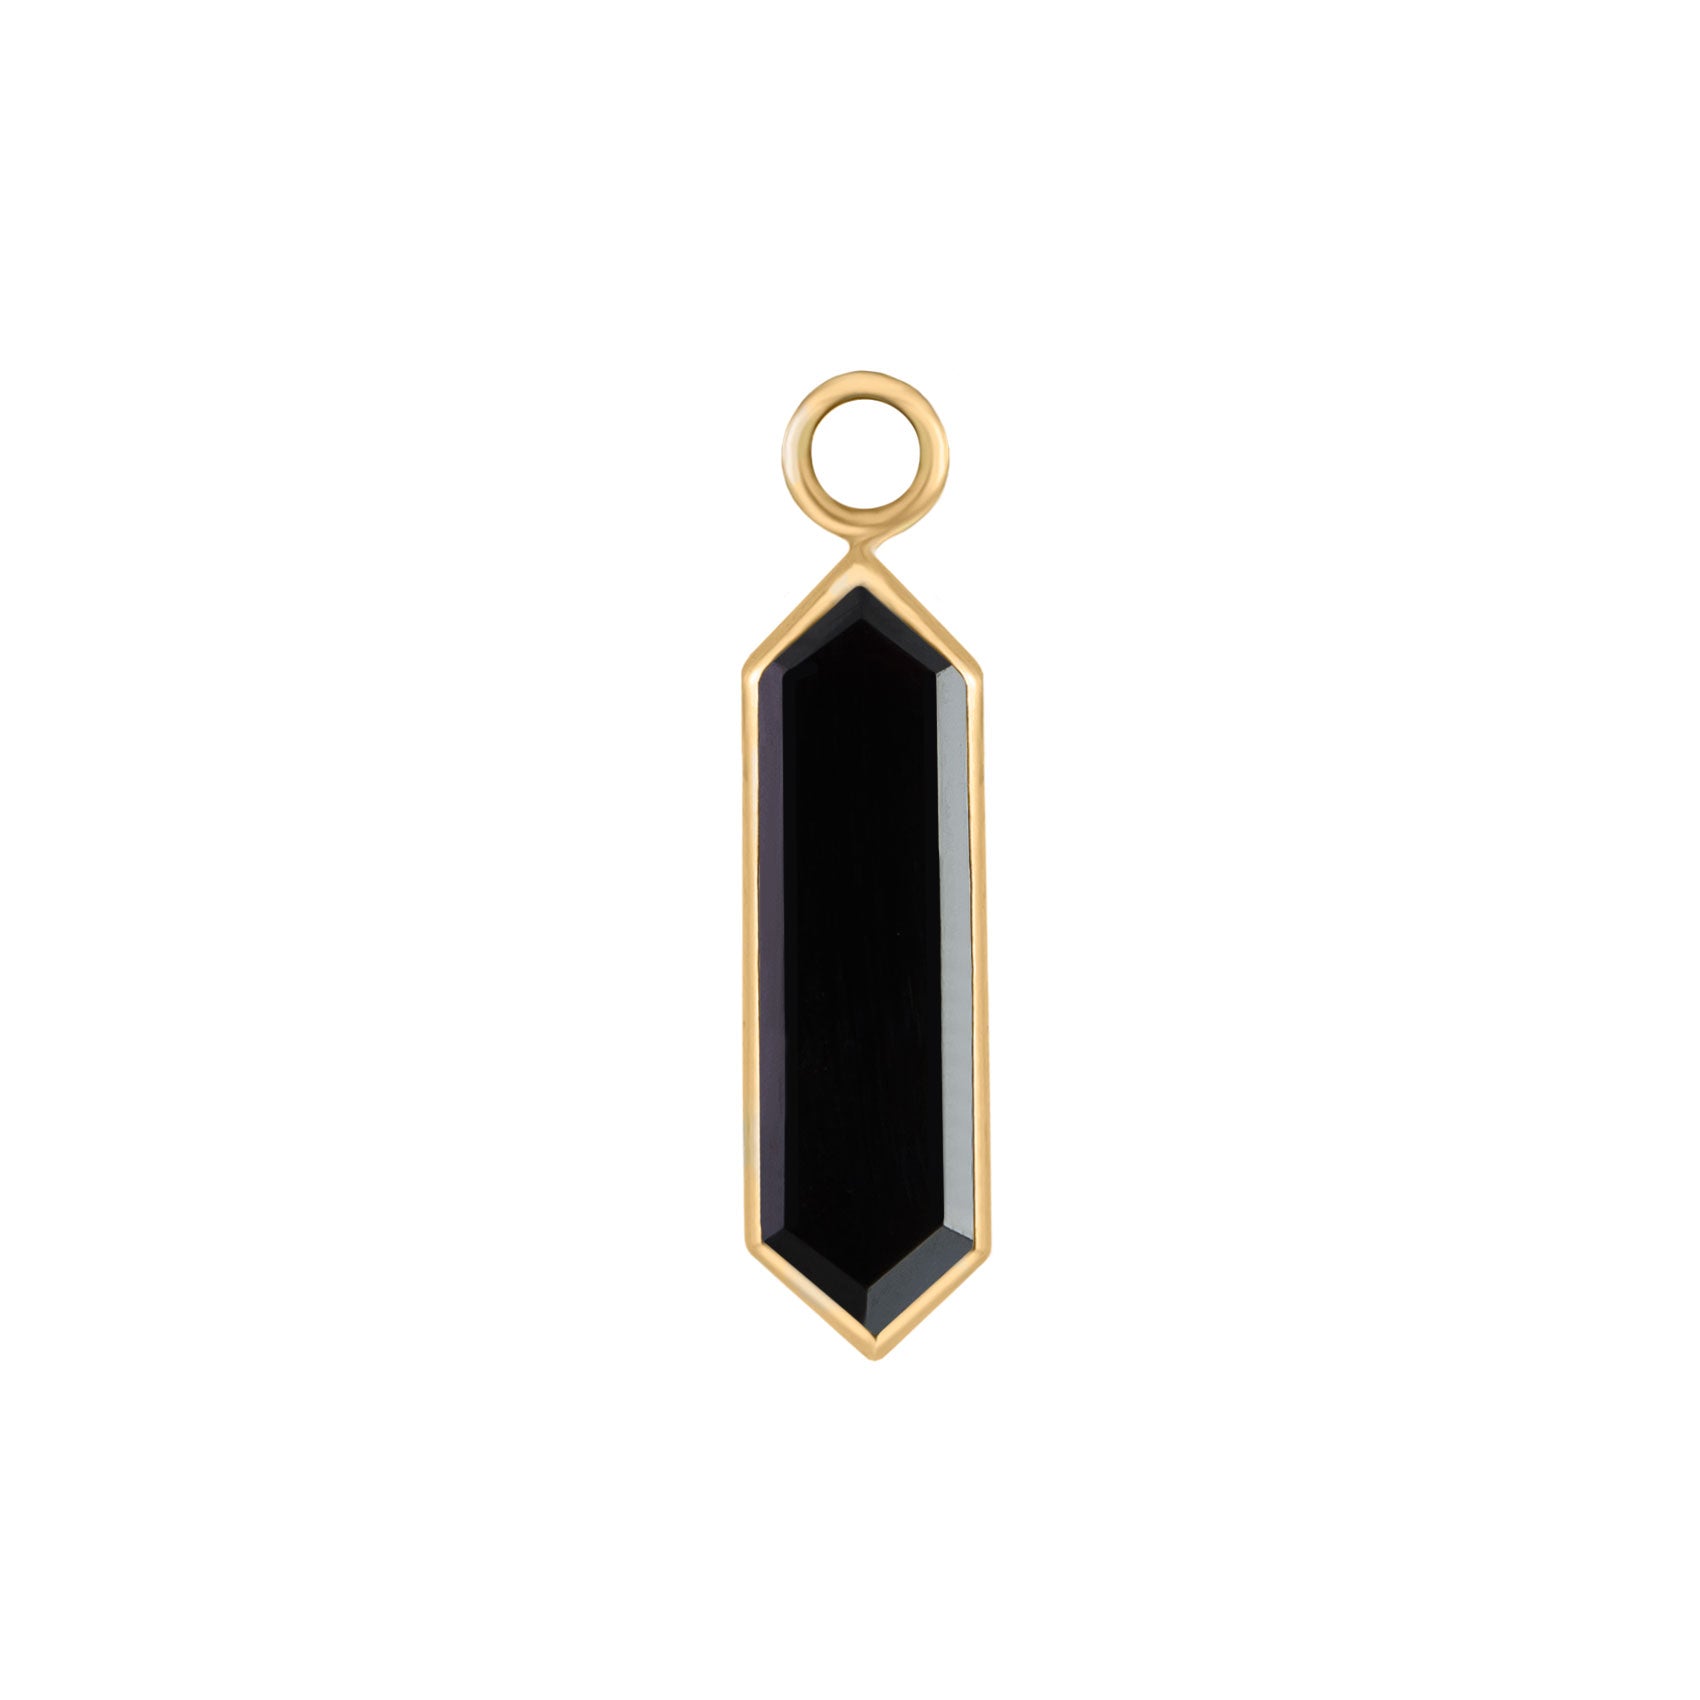 metier by tomfoolery 9ct yellow gold and black spinel hexa plaques.